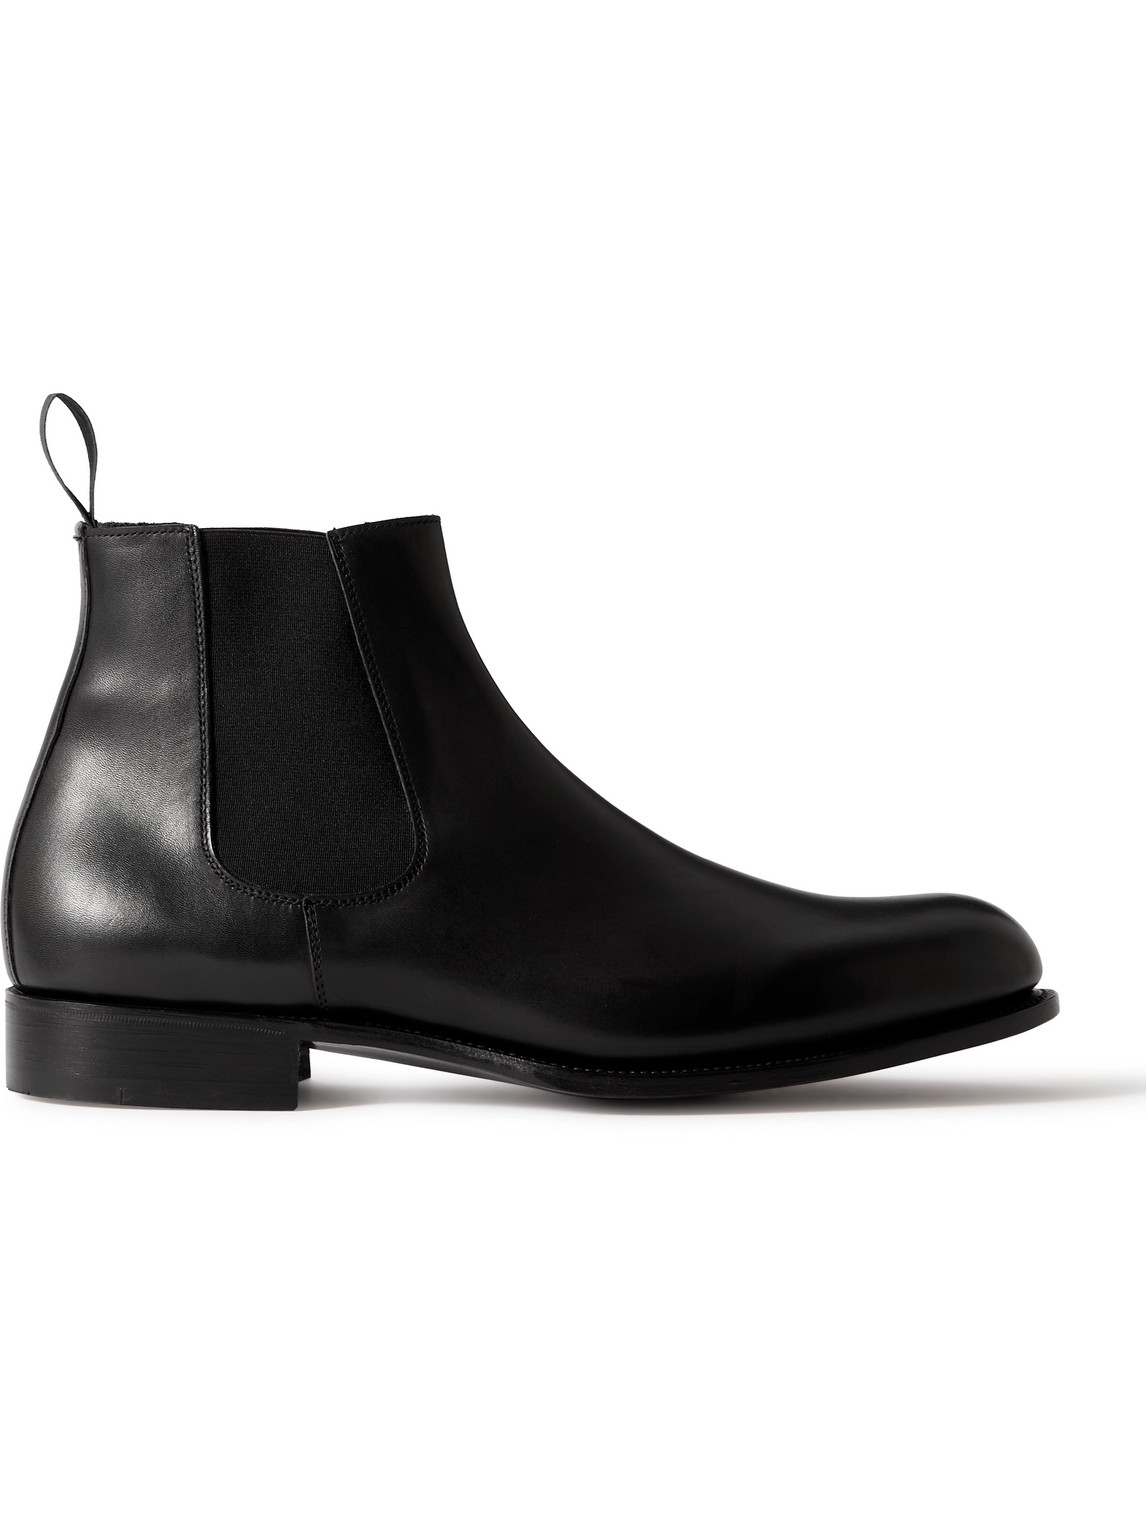 George Cleverley Jason Ii Leather Chelsea Boots In Black